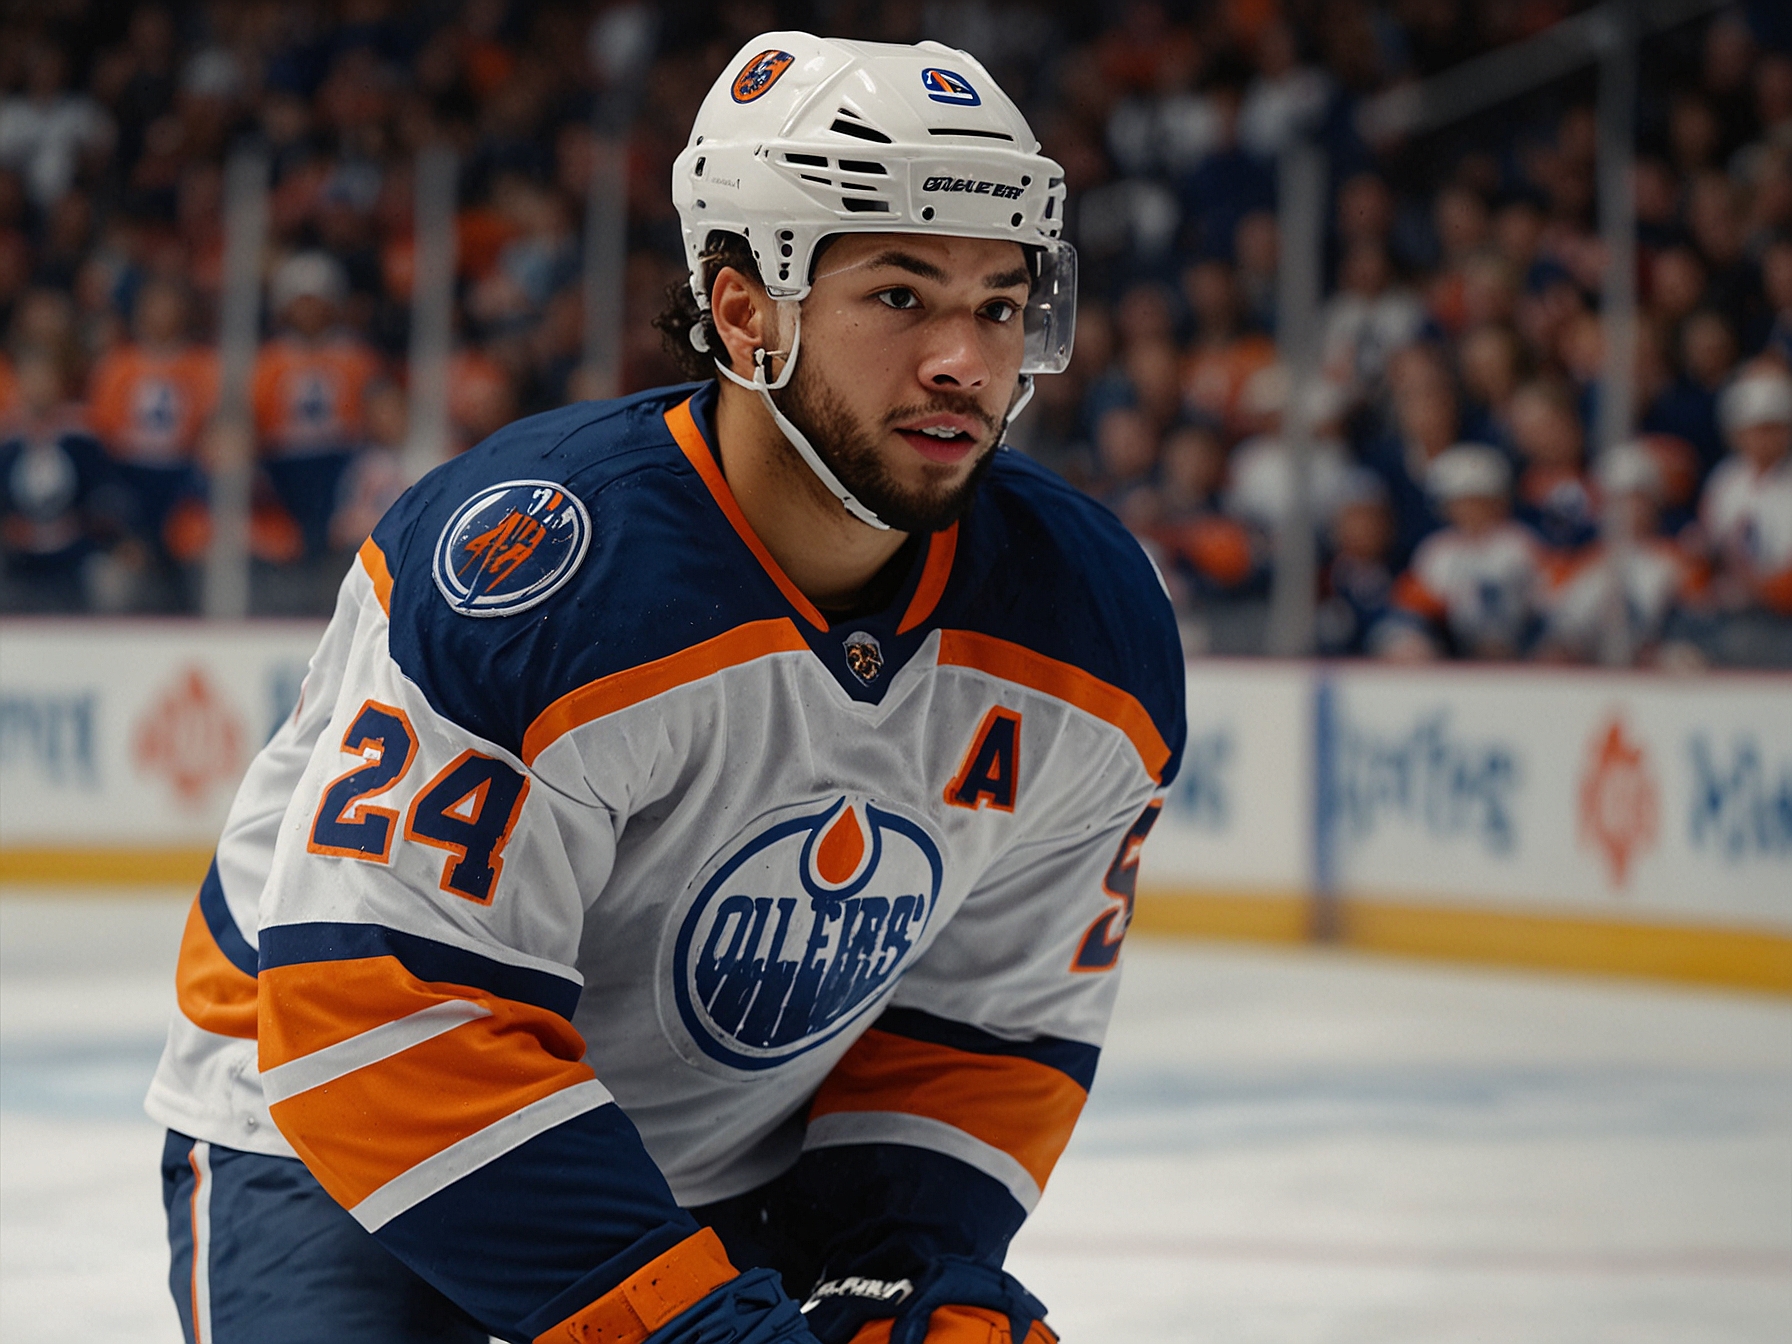 Edmonton Oilers' defenseman Darnell Nurse during an intense playoff match, highlighting his crucial role in the team's defensive strategies throughout the season.